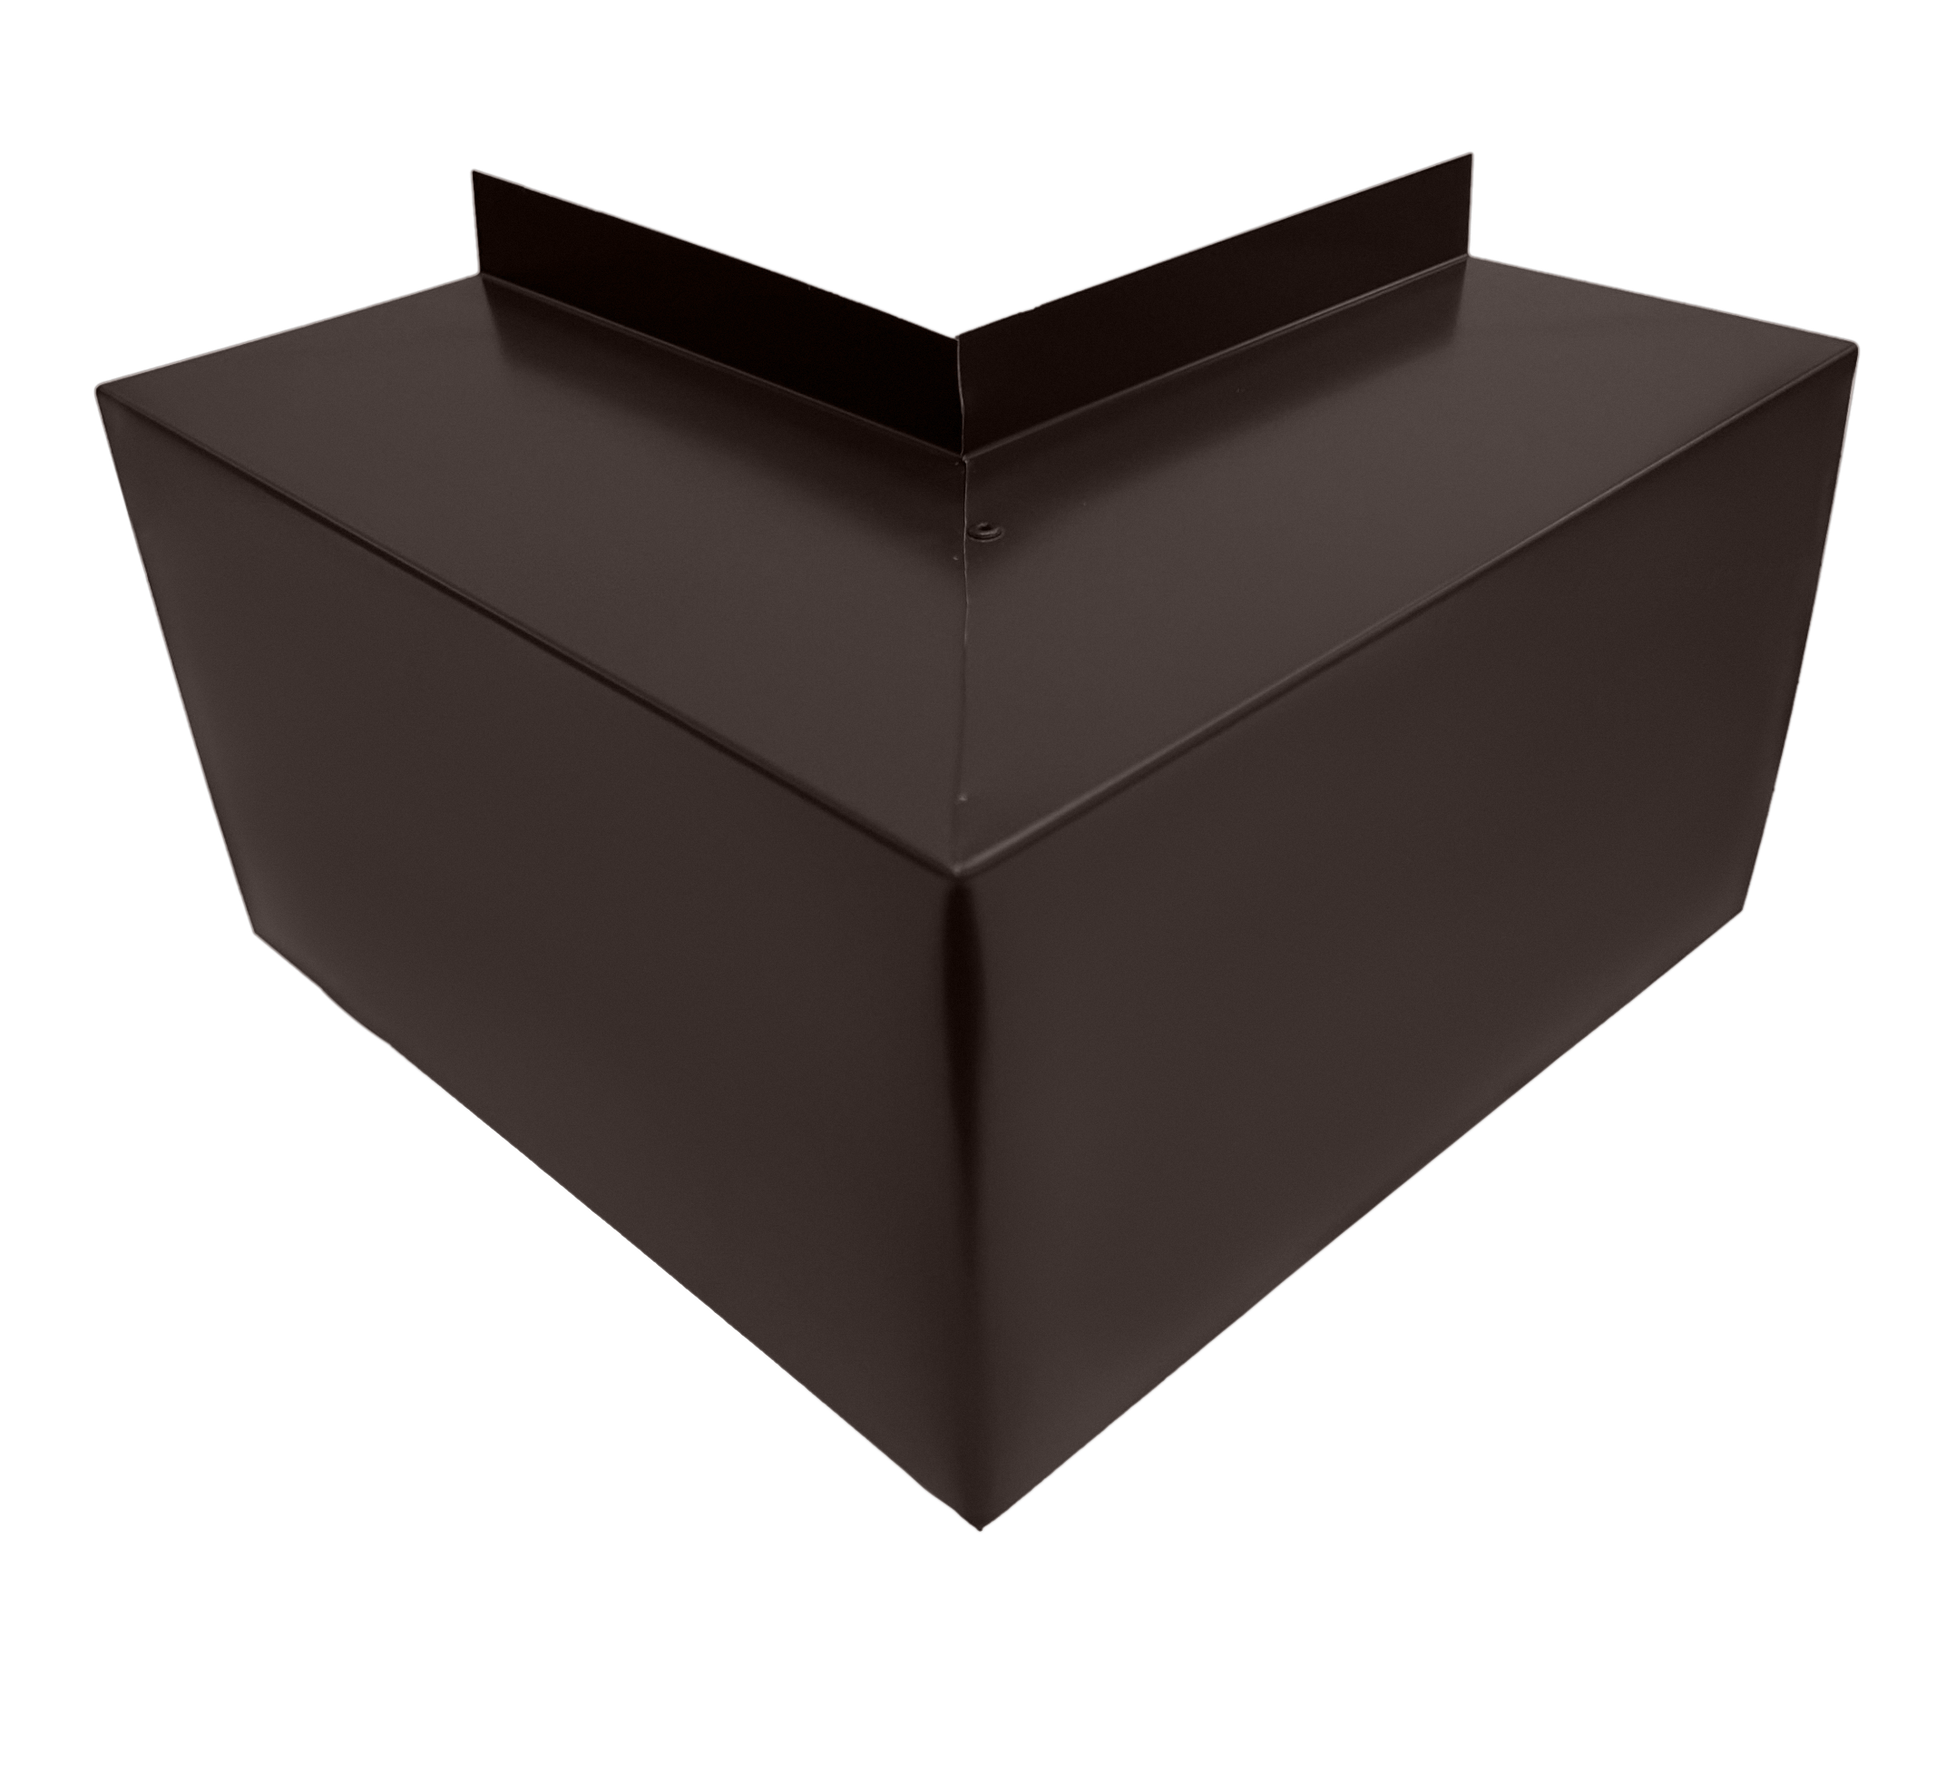 A high-resolution image of a dark brown, metal roof corner flashing piece. The Perma Cover Commercial Series - 24 Gauge Line Set Cover Outside Corner Elbows - Premium Quality, crafted from 24 gauge steel elbows, has a 90-degree angle to fit the corner joint of a roof, with clean, sharp edges and a smooth, matte finish for easy installation.